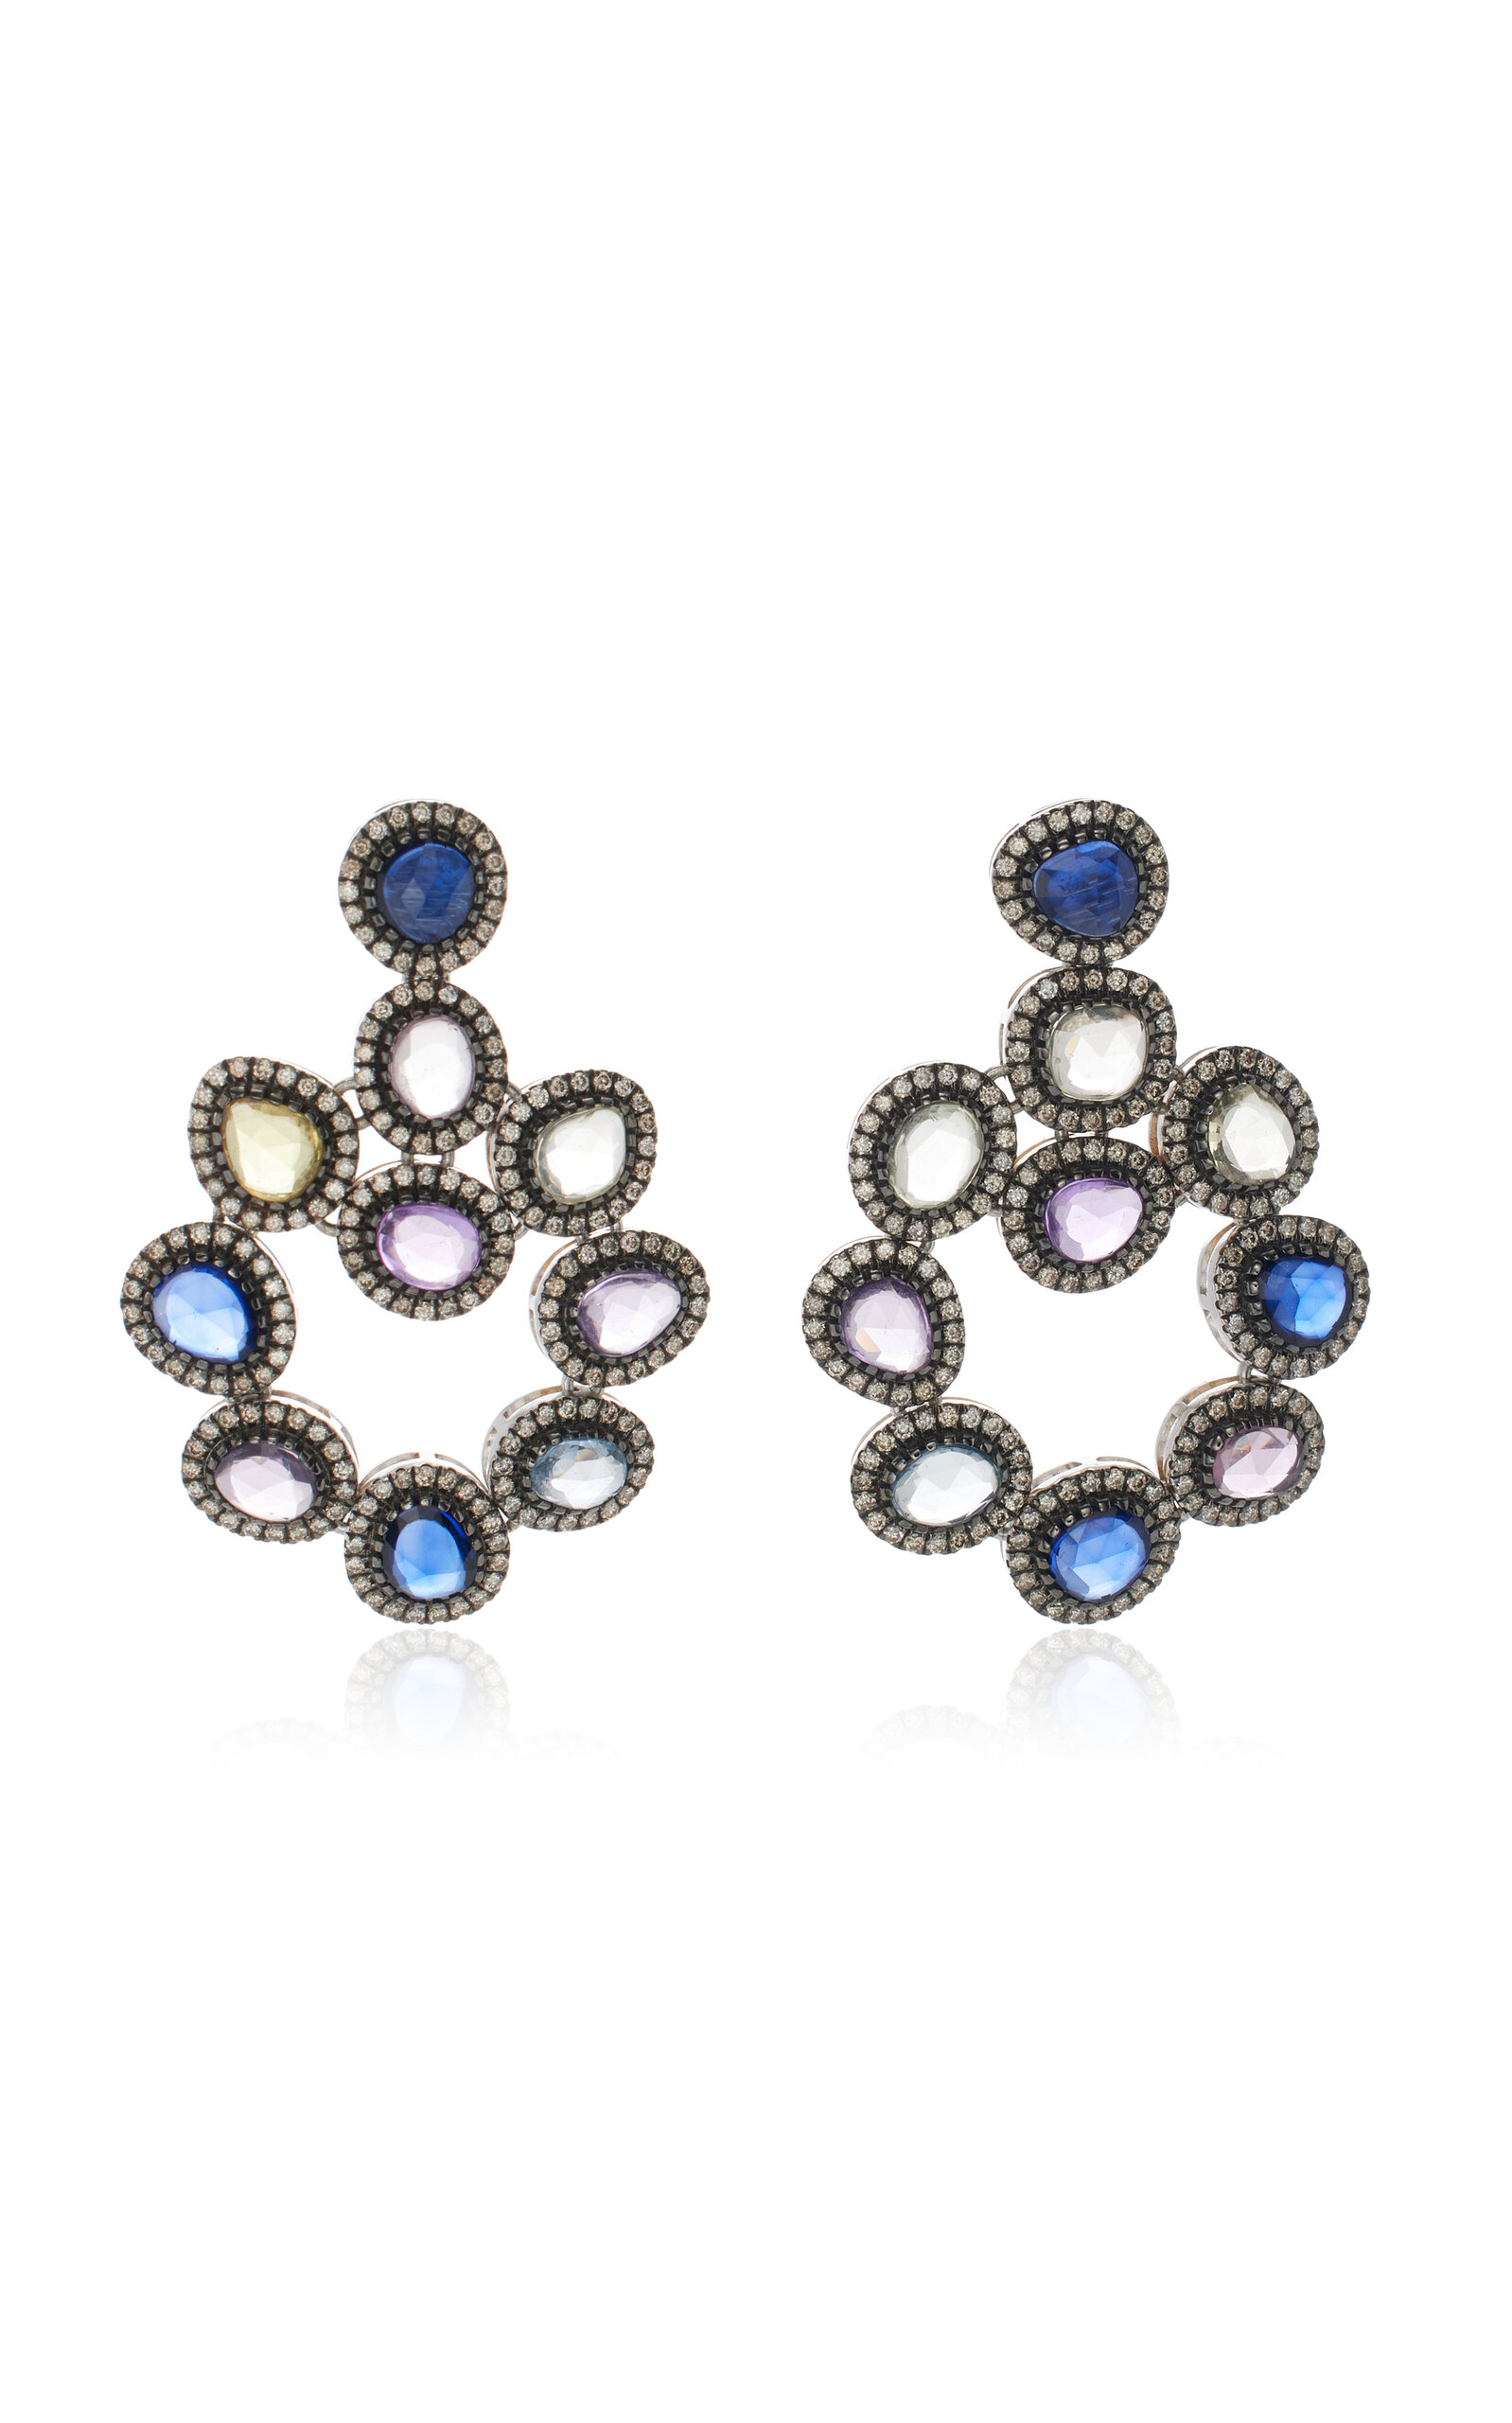 One-of-a-Kind Midnight Blossom 18K White Gold Sapphire Earrings